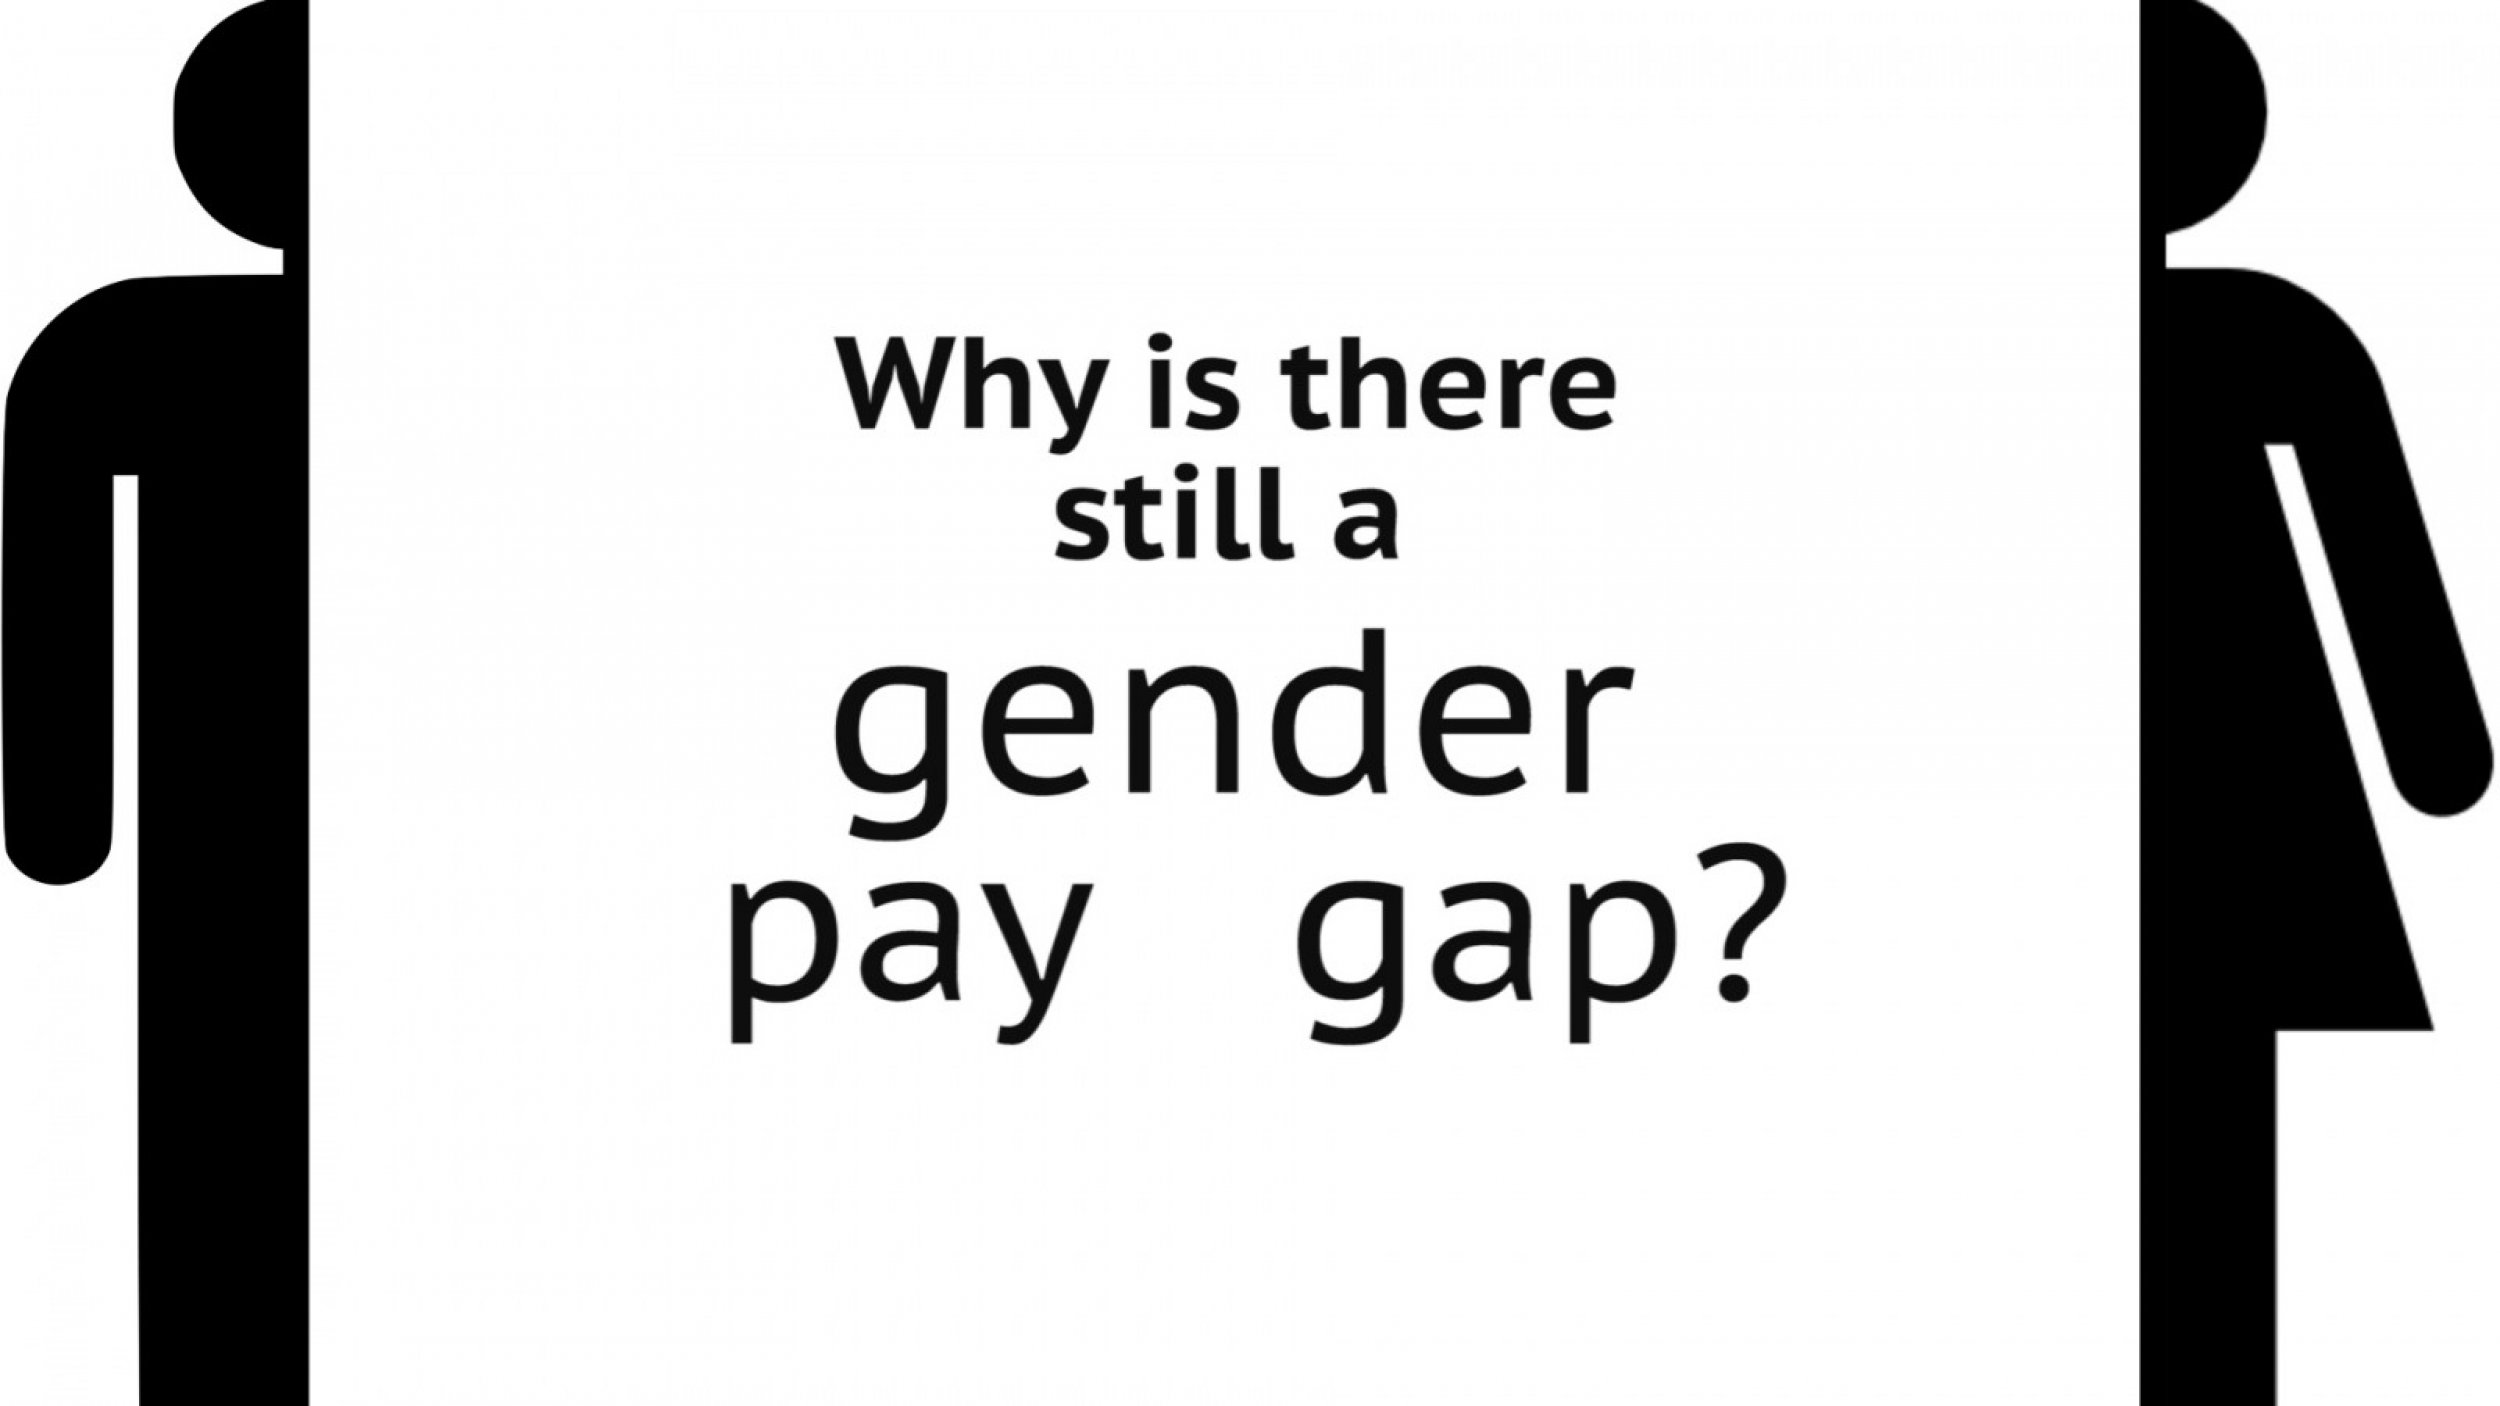 Why is there still a gender pay gap